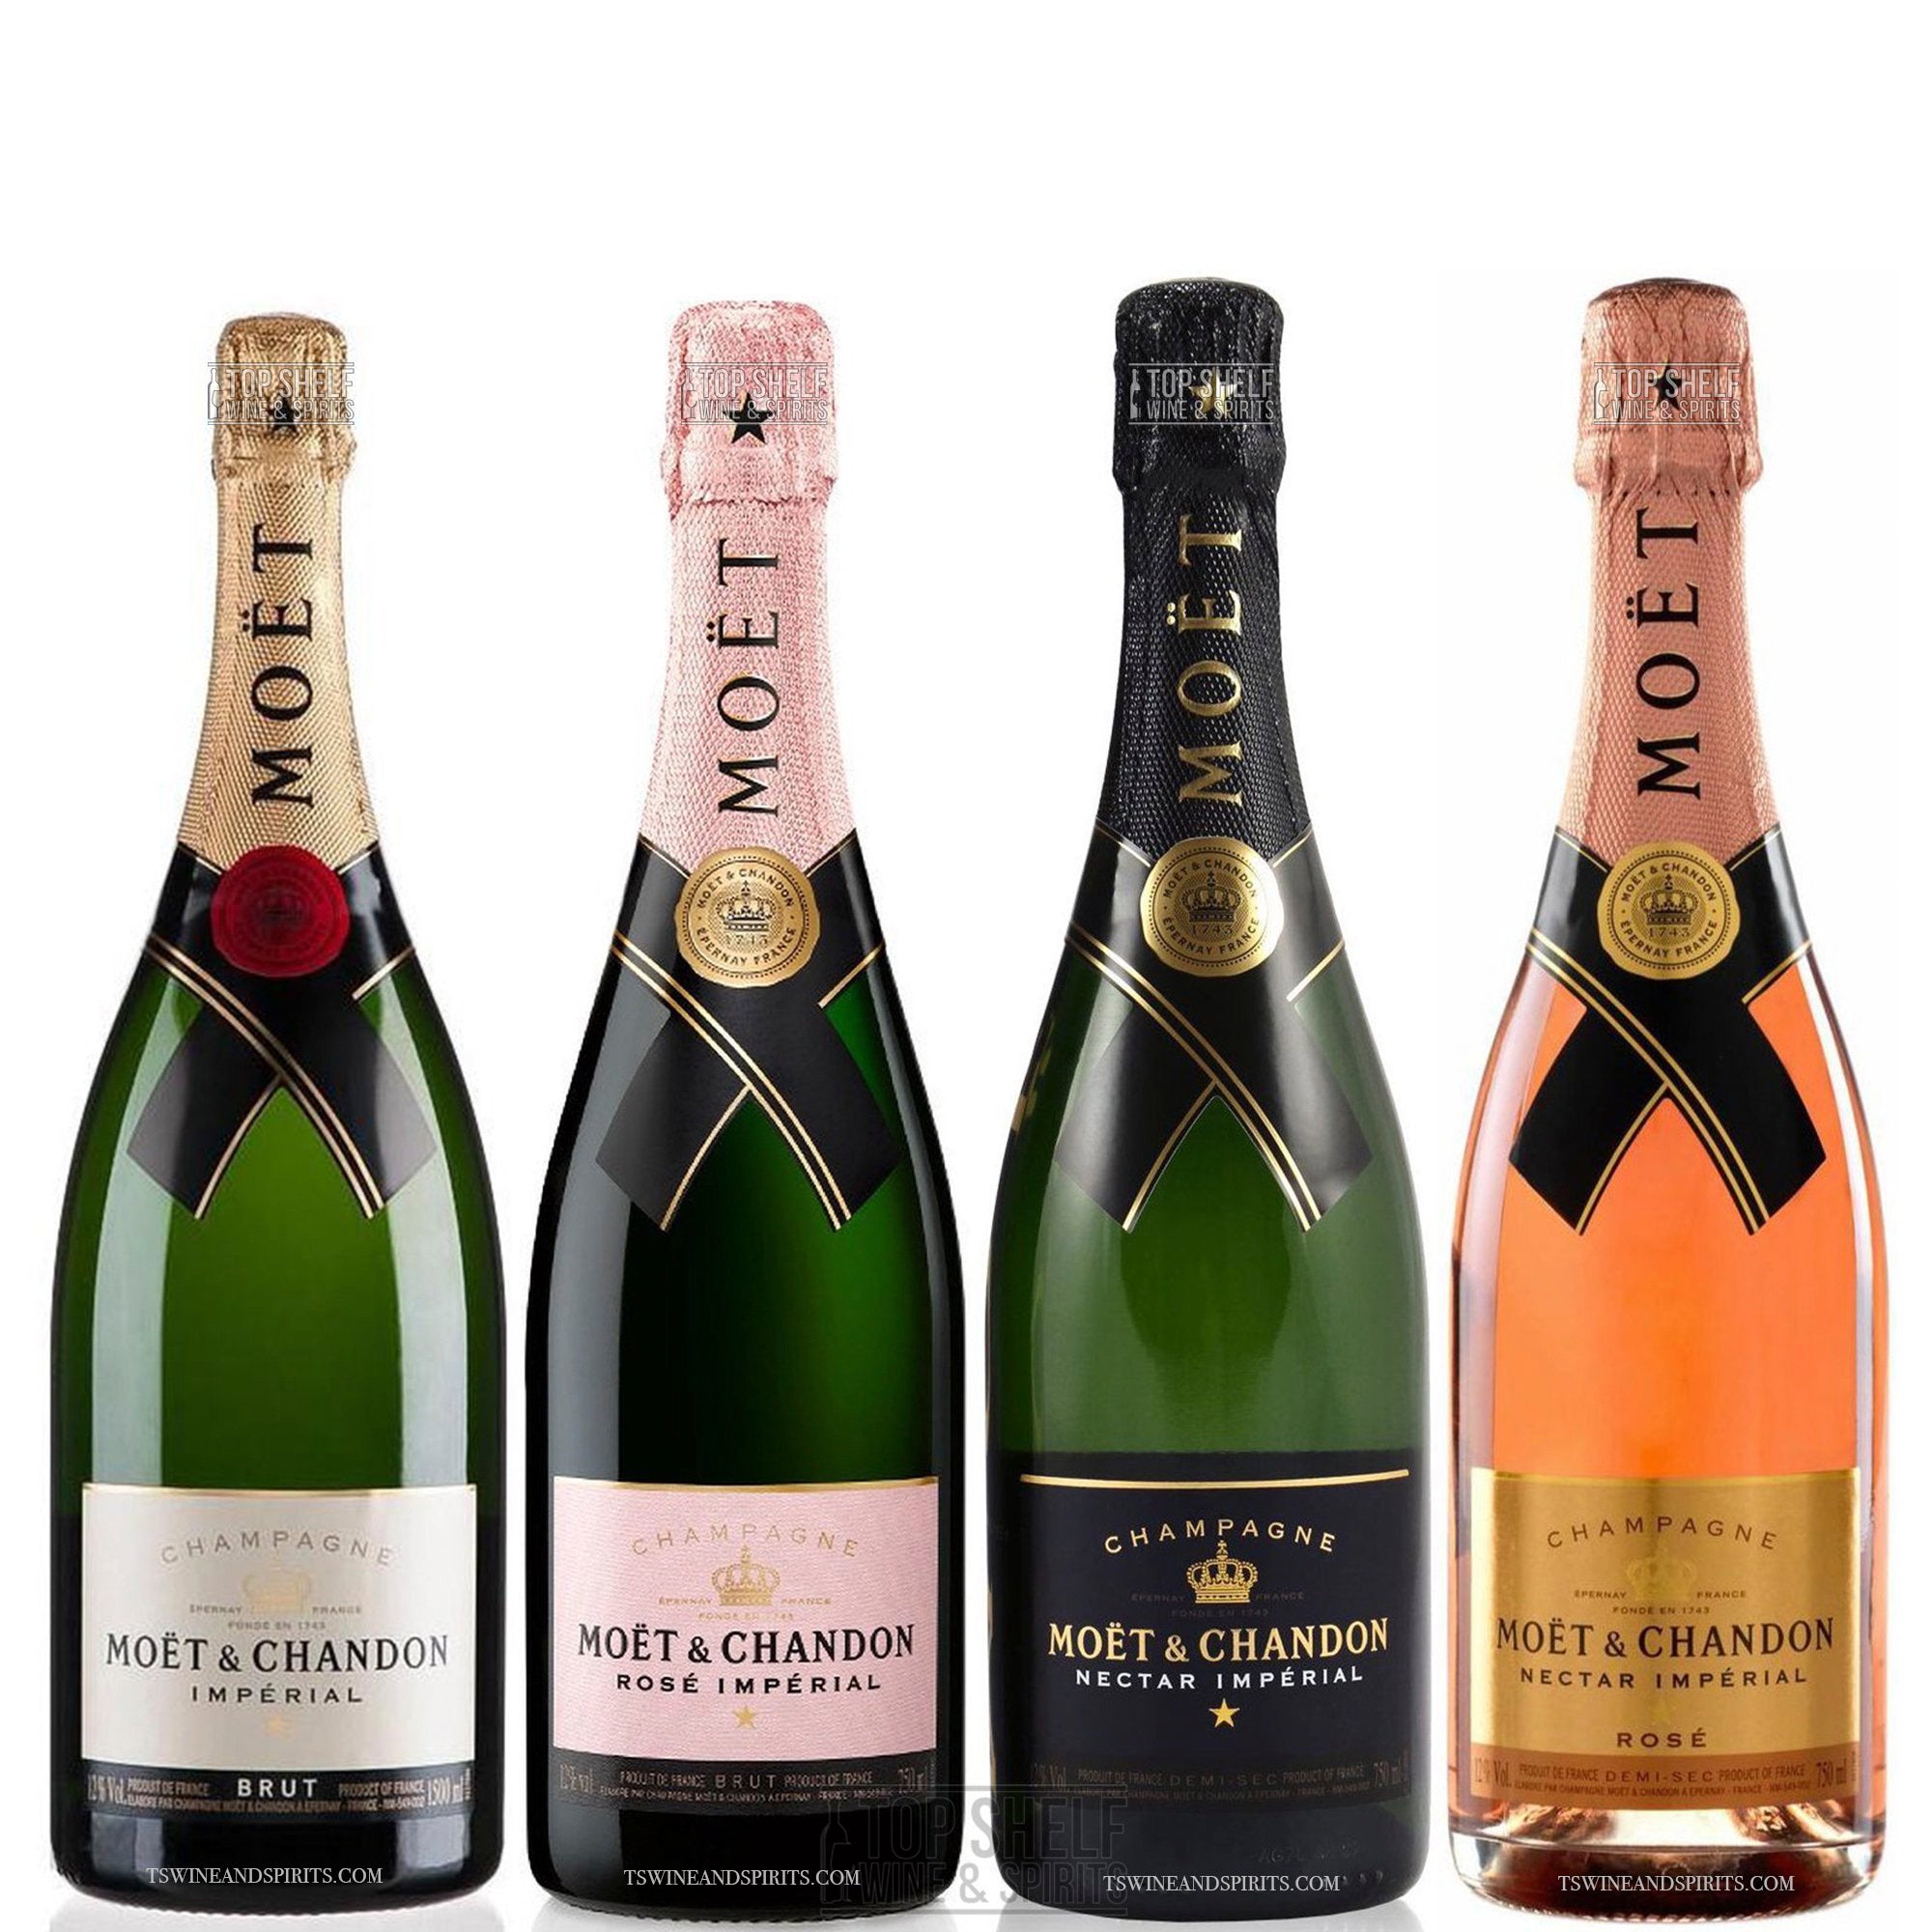 Moet & Chandon Brut Imperial 200ml - Champagne - Boozeat